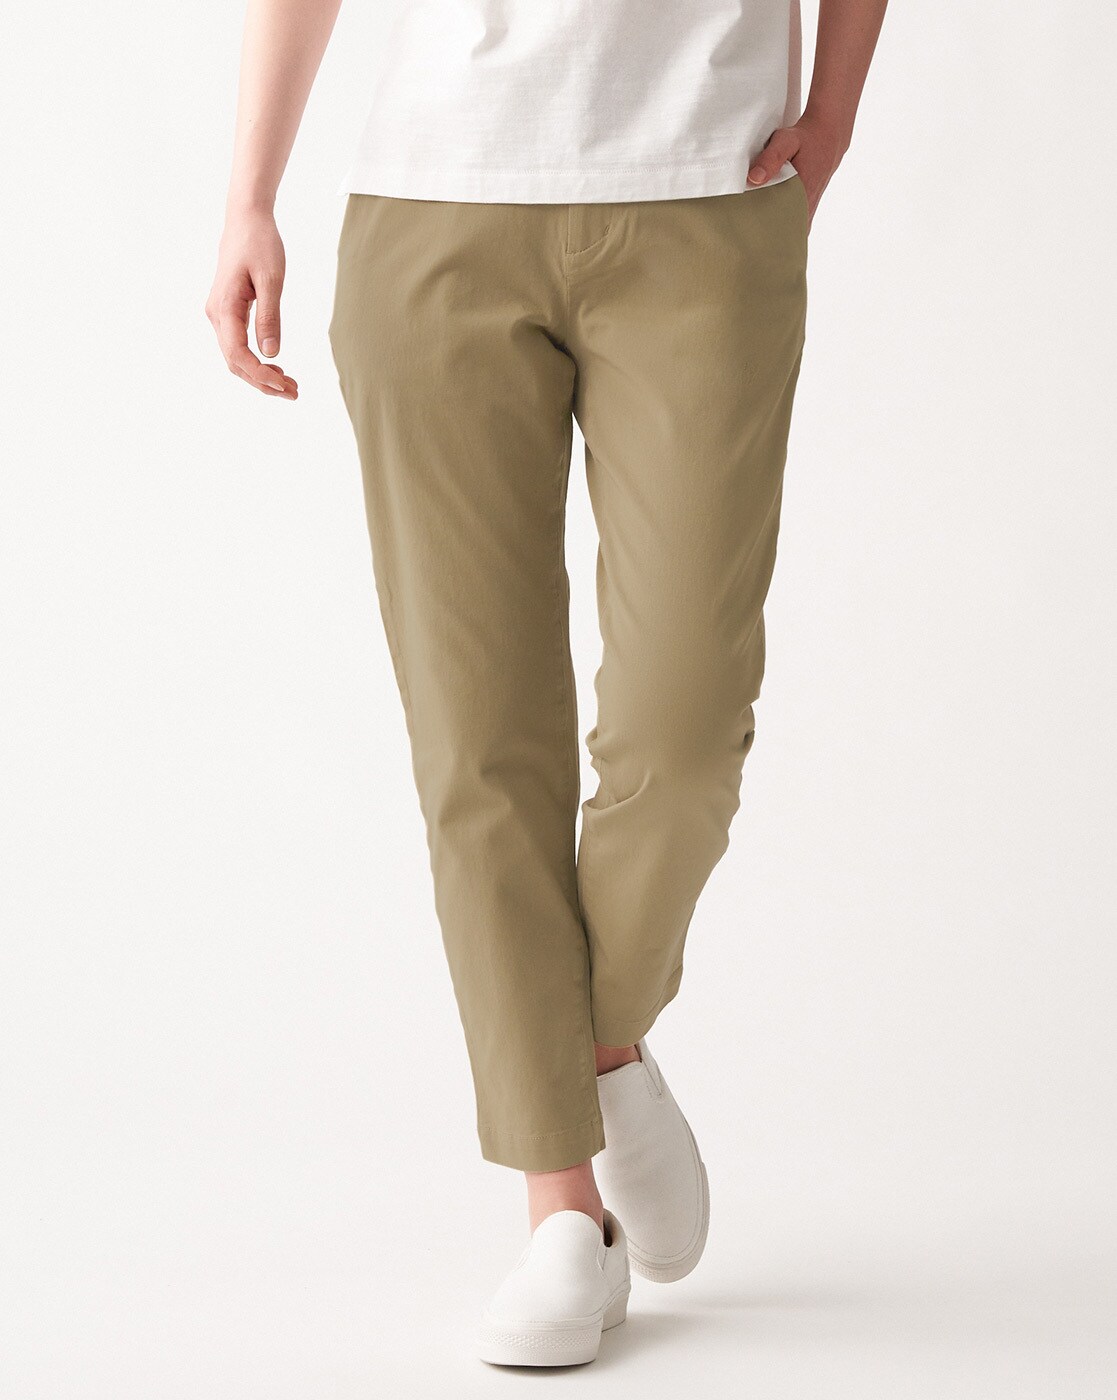 MUJI Canada - Our popular French Linen trousers are on... | Facebook